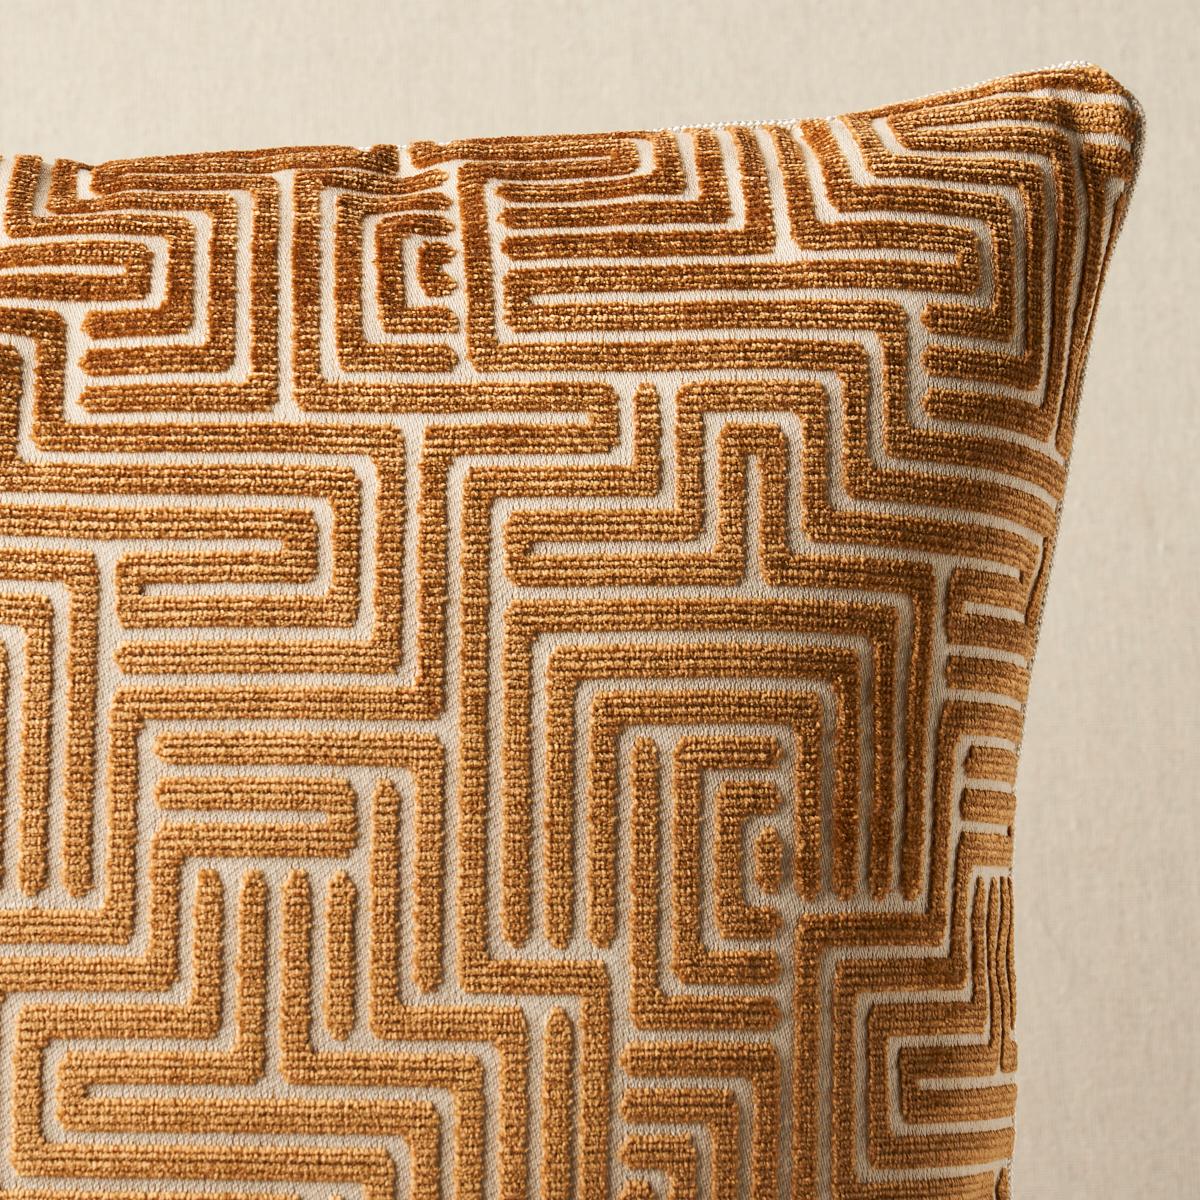 This pillow features Lisboa Velvet. This unique, labyrinthine pattern was inspired by Portuguese tilework. Its winding, linear motif has a striking, large scale and a subtle, metallic sheen. Pillow is finished with a welt in Gustave Silk Lip Cord.